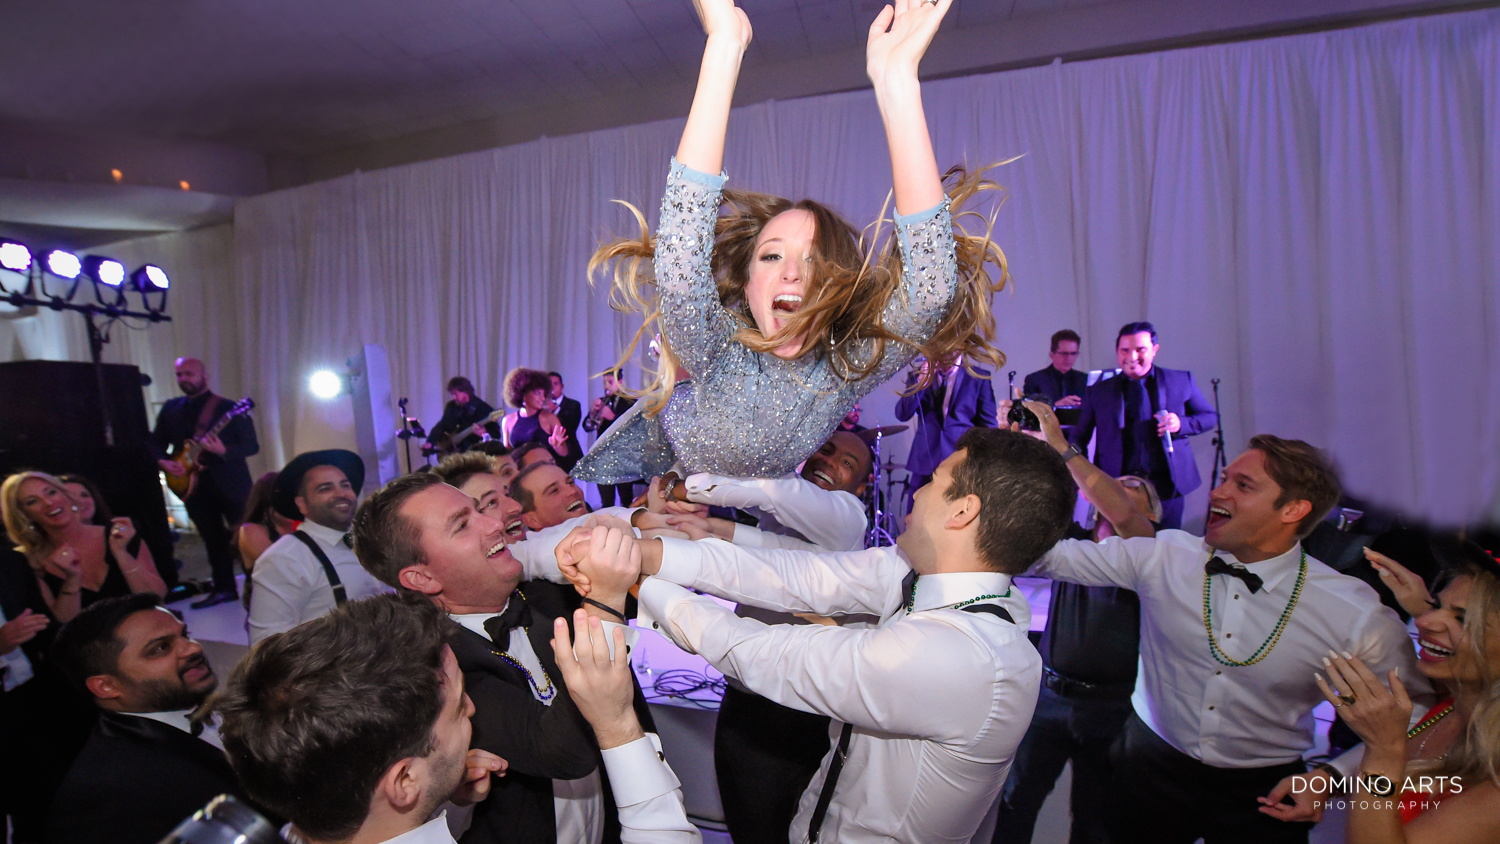 Fun crazy party pictures at fontainebleau miami wedding crowd surfing bride